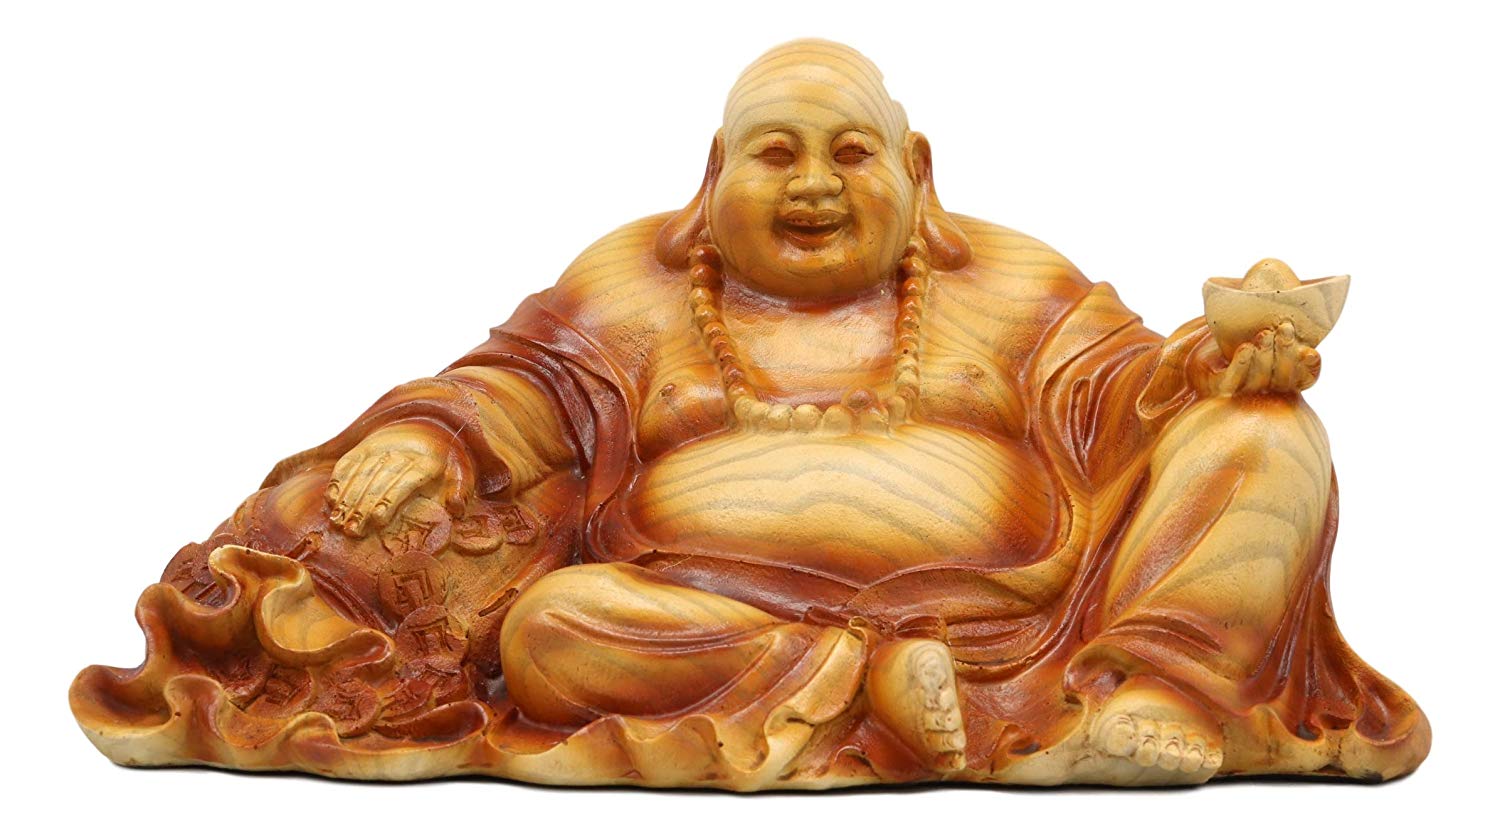 Ebros Gift Ebros Feng Shui Hotei Happy Buddha Sitting with Gold Ingot and Money Coins Figurine 9" Wide Zen Laughing Lucky Buddhas Budai...